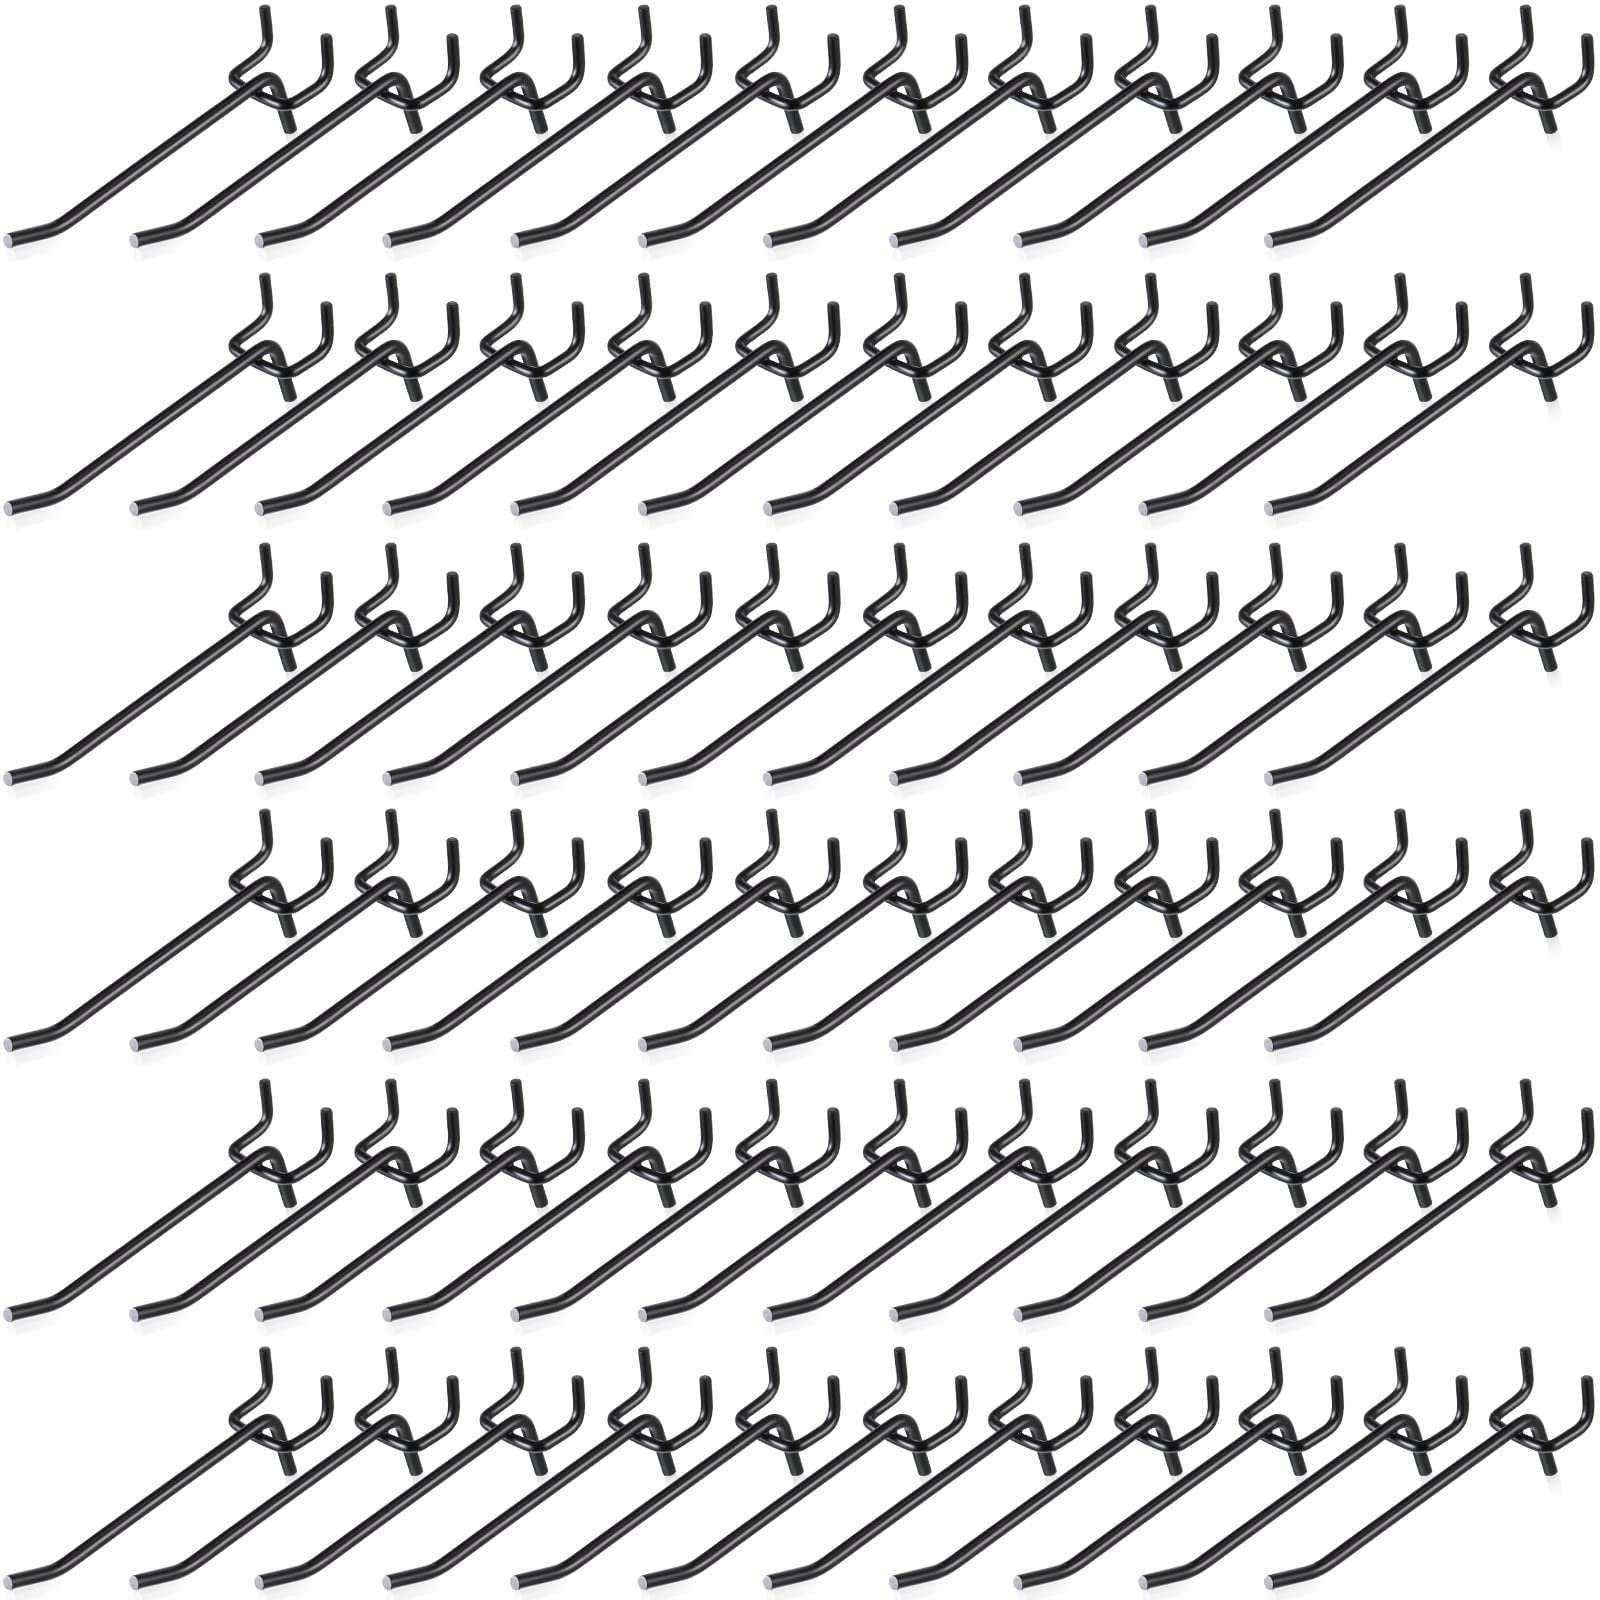 100 Pieces Peg Board Shelving Hooks Black Stainless Steel Pegboard Hooks Pegboard Display Hooks Hanging Peg Board Holders Peg Wall Hooks for 1/8 and 1/4 Pegboard for Garage Storage Organizer (4 Inch)